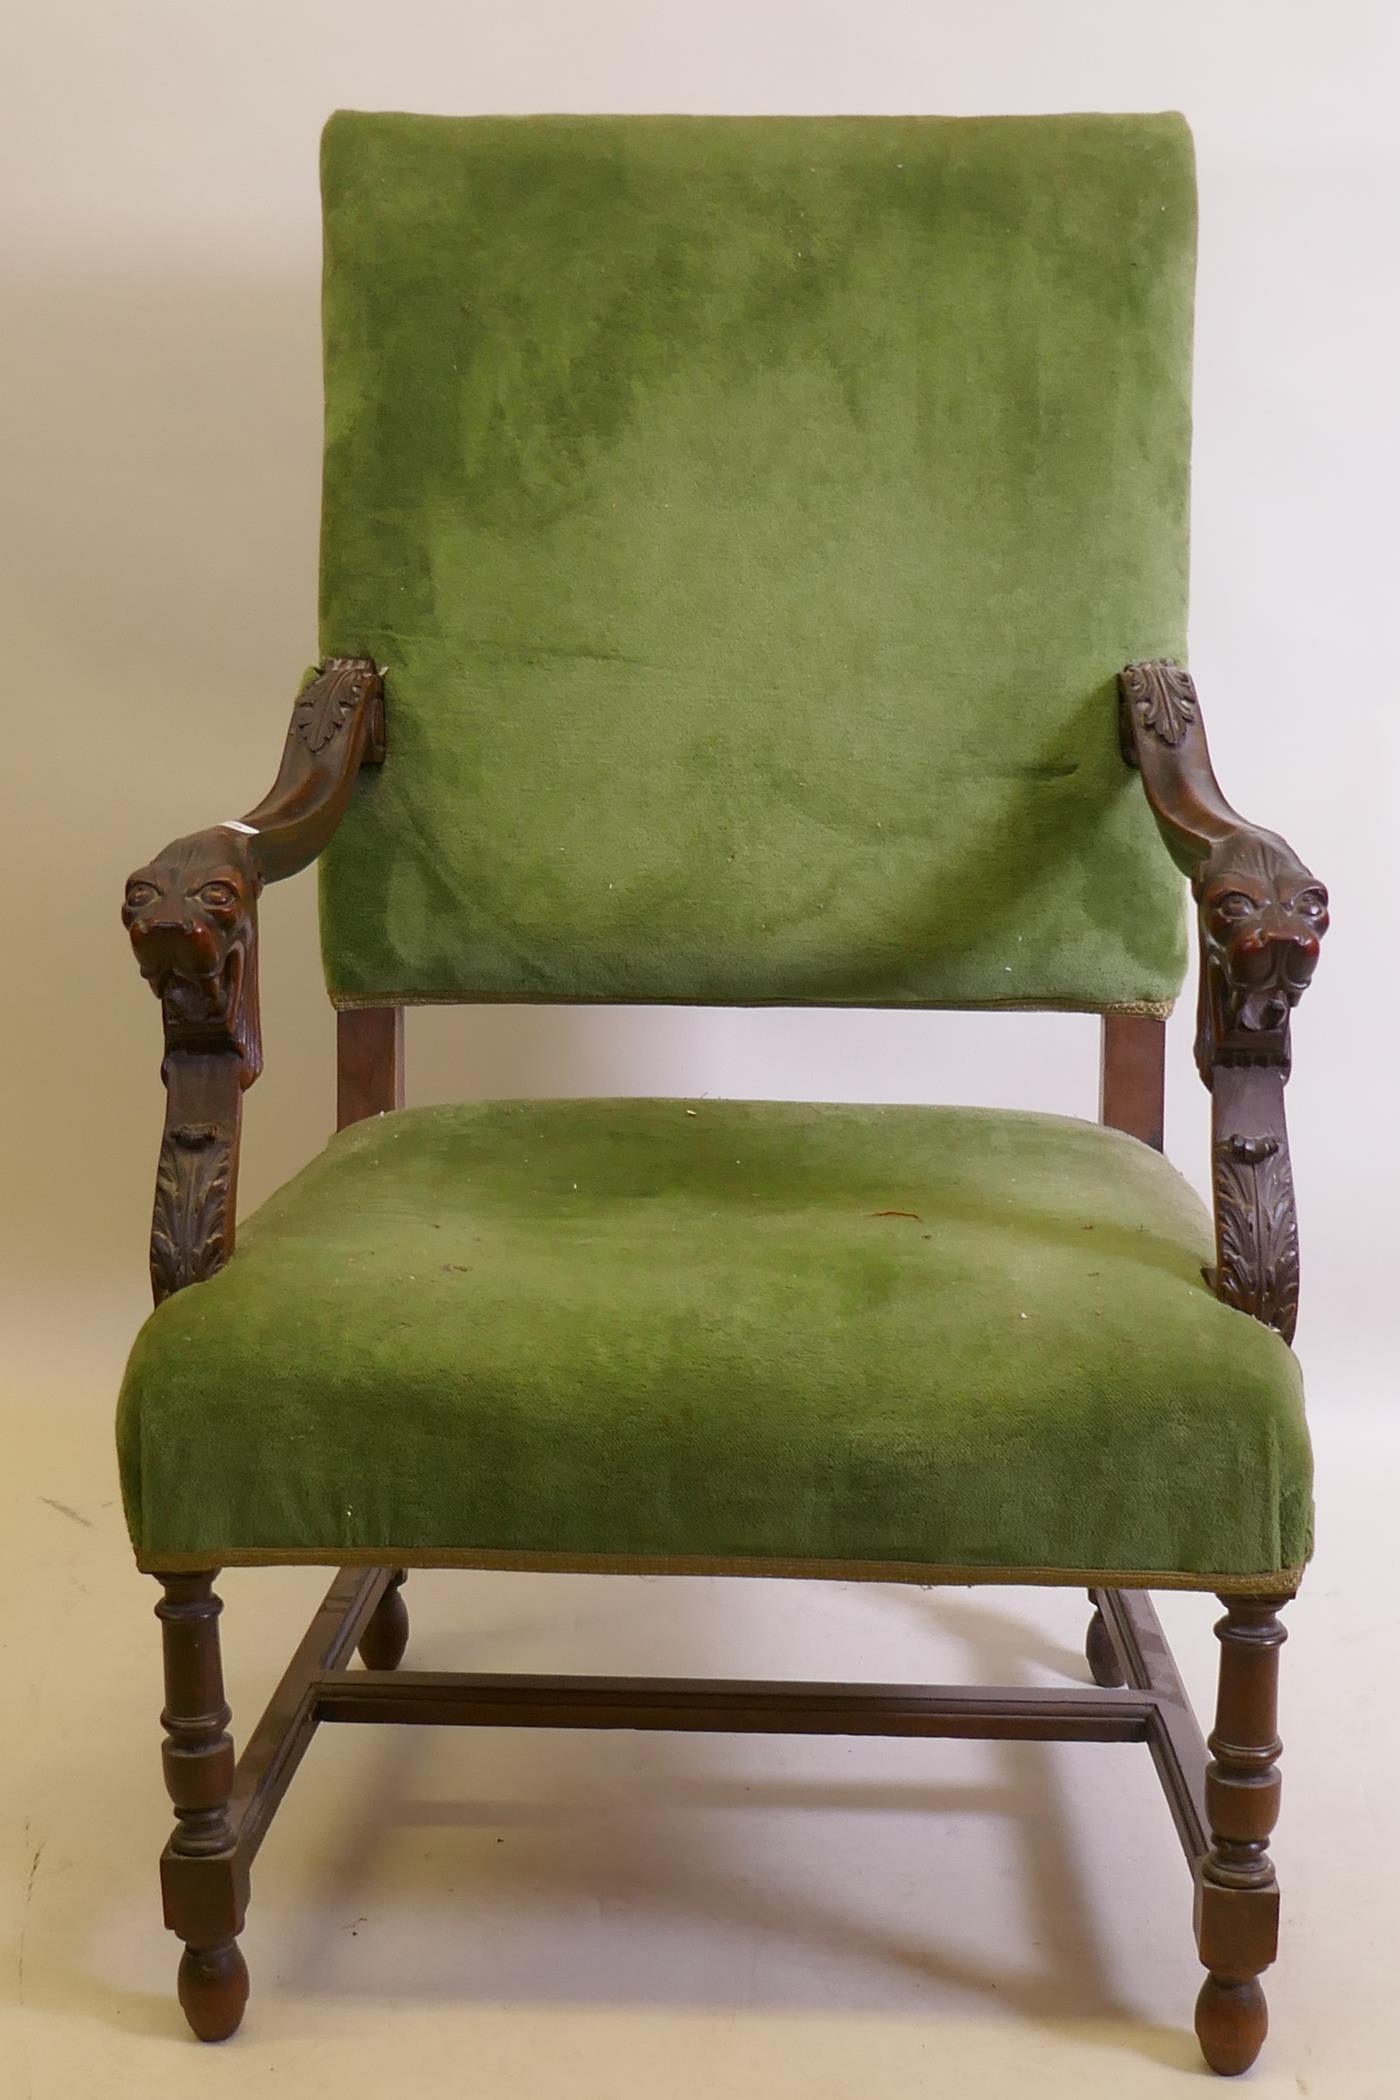 A C19th high back open arm chair with carved lion mask arms, raised on turned supports, AF - Image 3 of 3